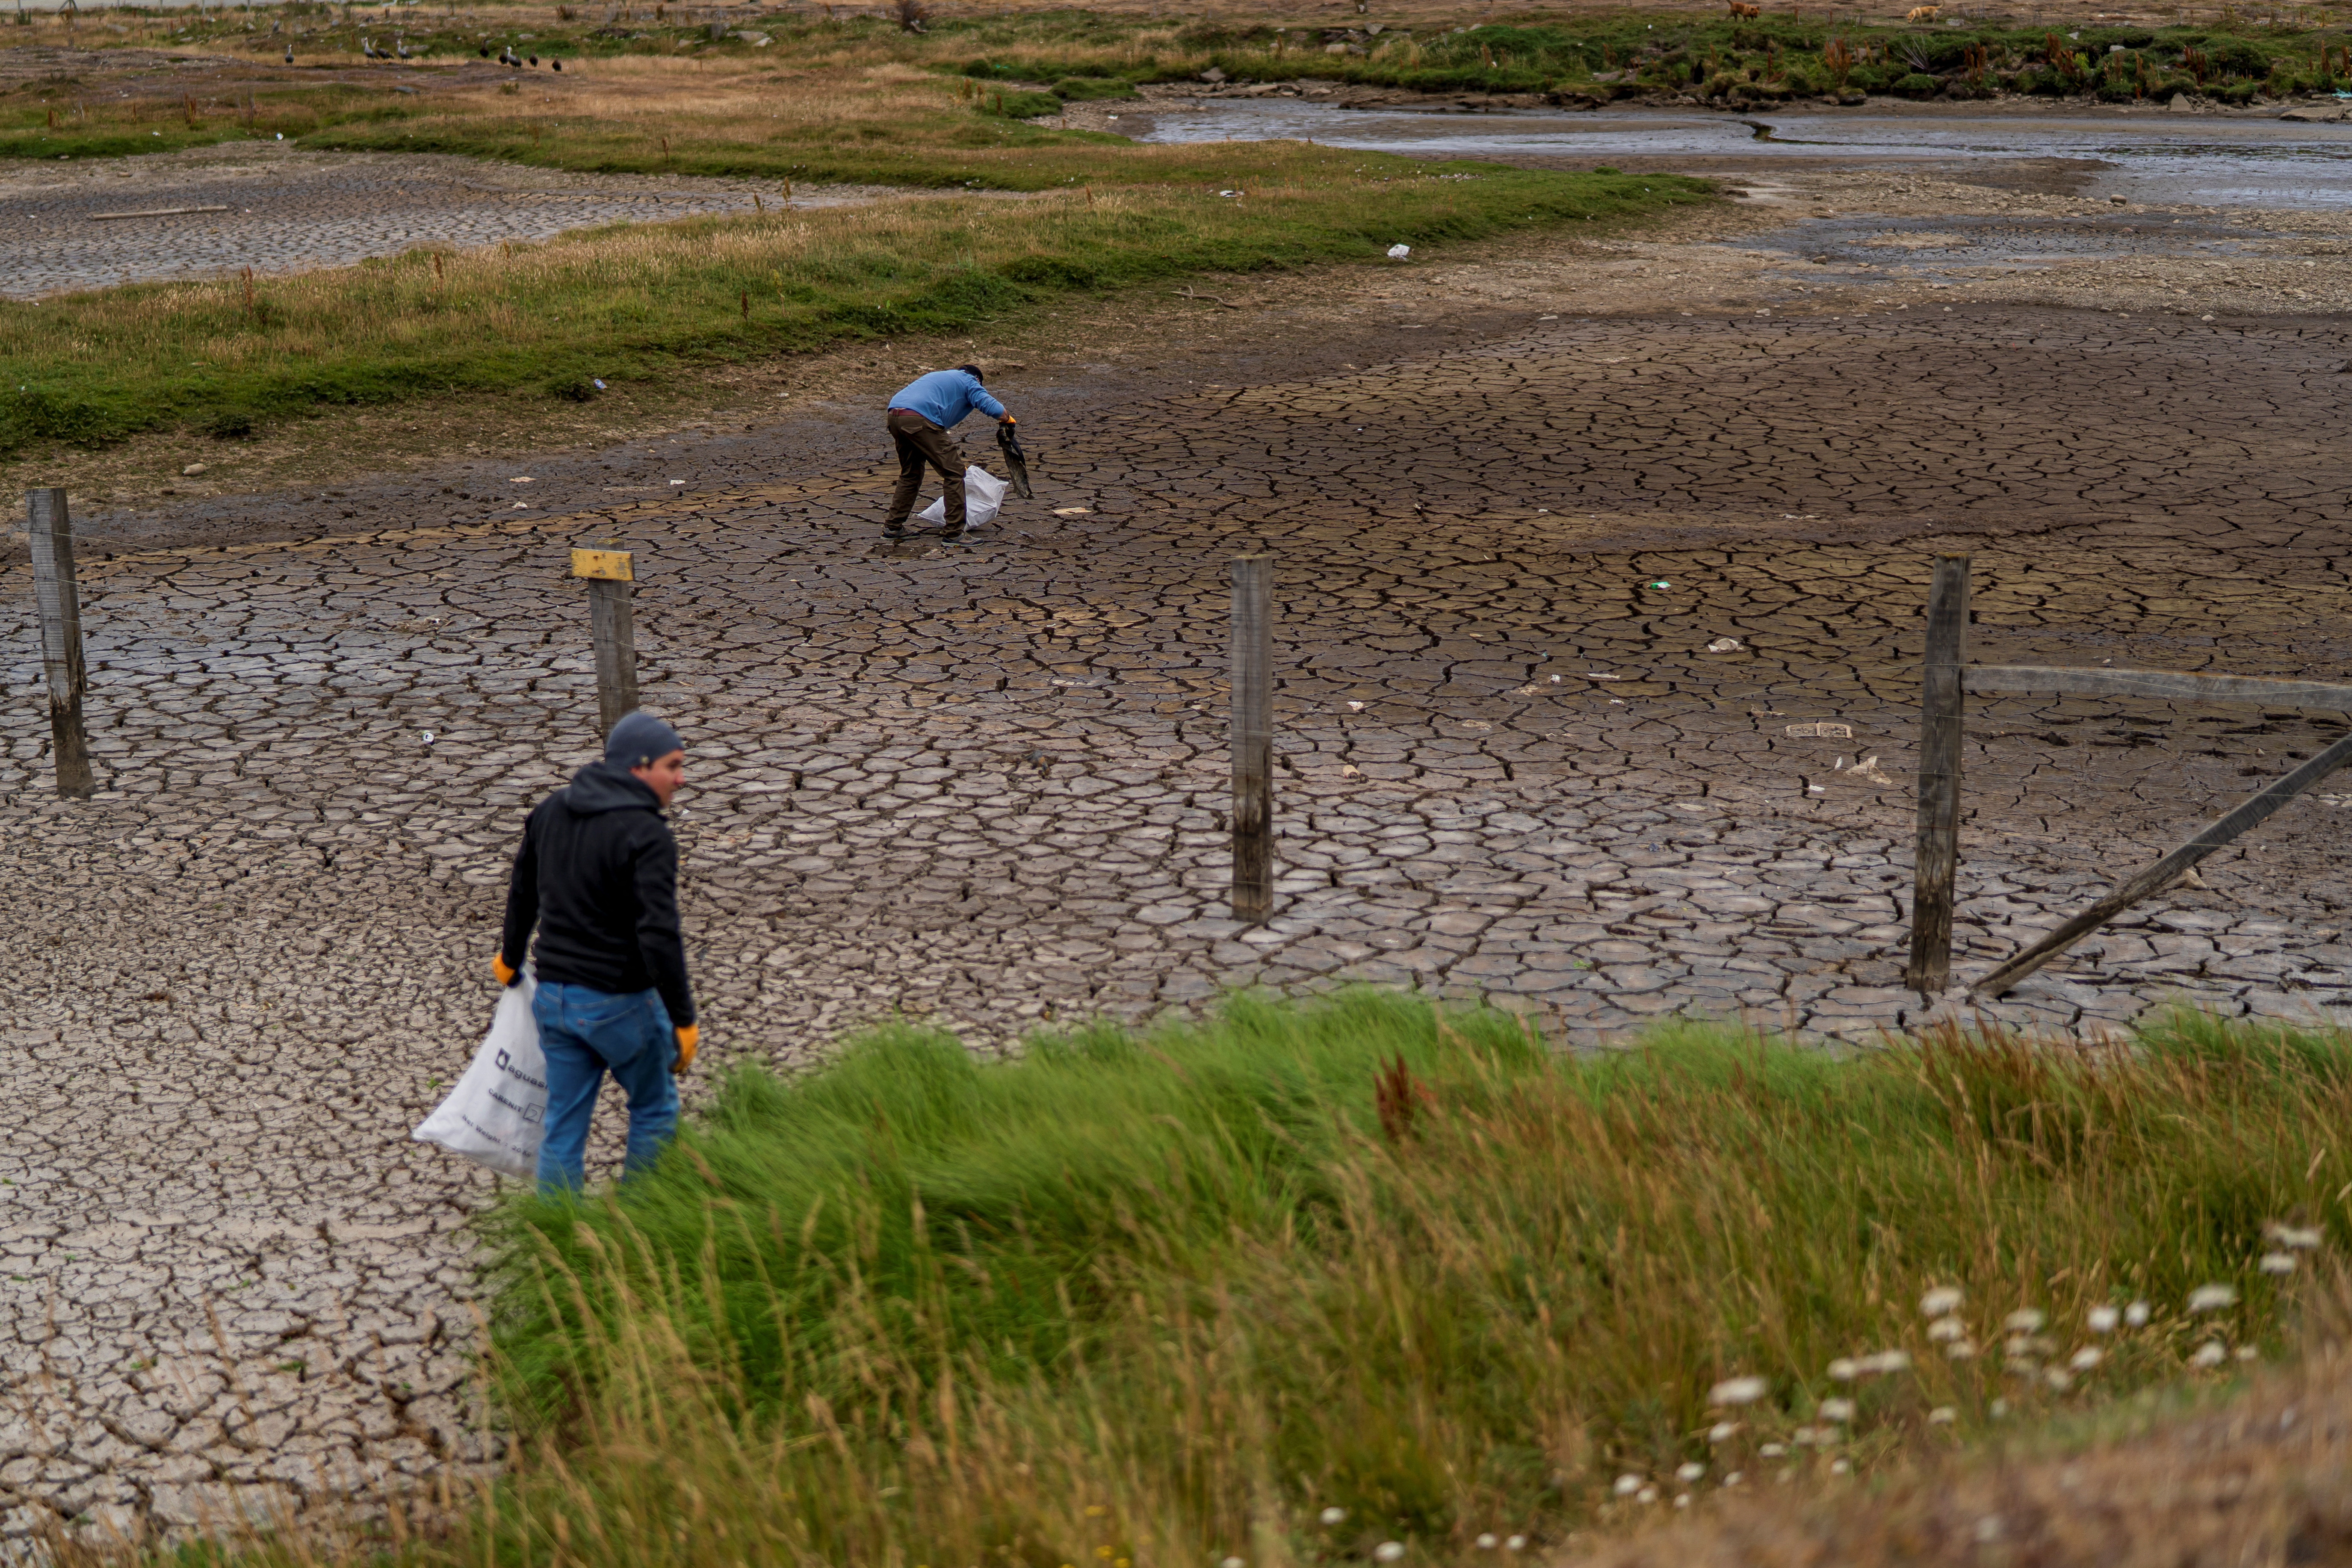 People clean a wetland that is drying up, in Punta Arenas